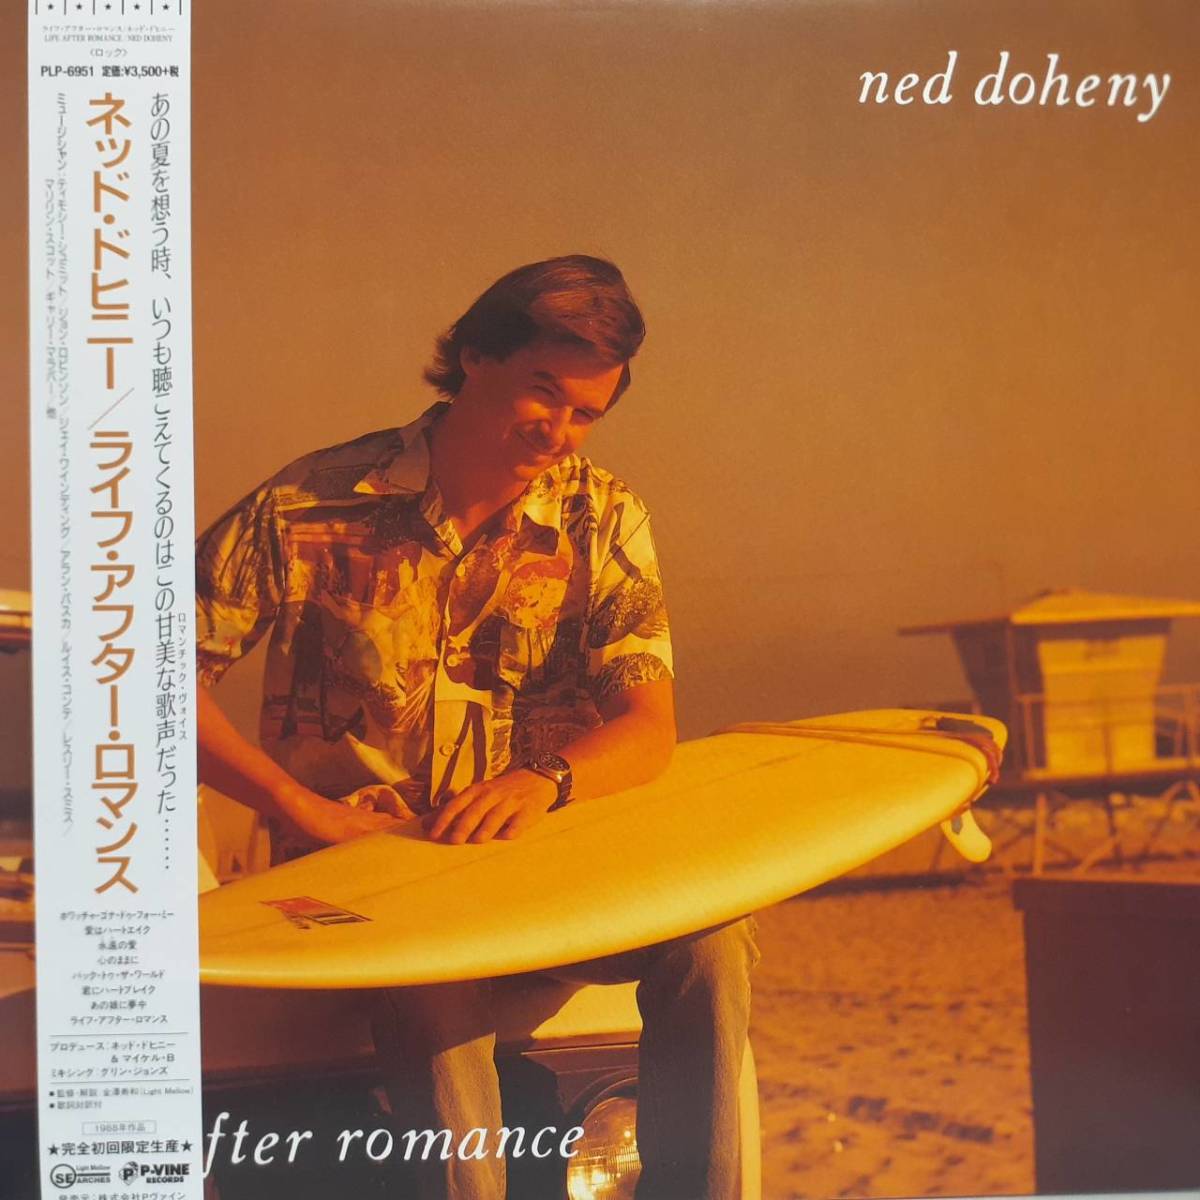  rare limitation record Japanese record LP obi attaching Ned Doheny / Life After Romance 2019 year P-VINE RLP-6951nedo*dohi knee life * after * romance AOR